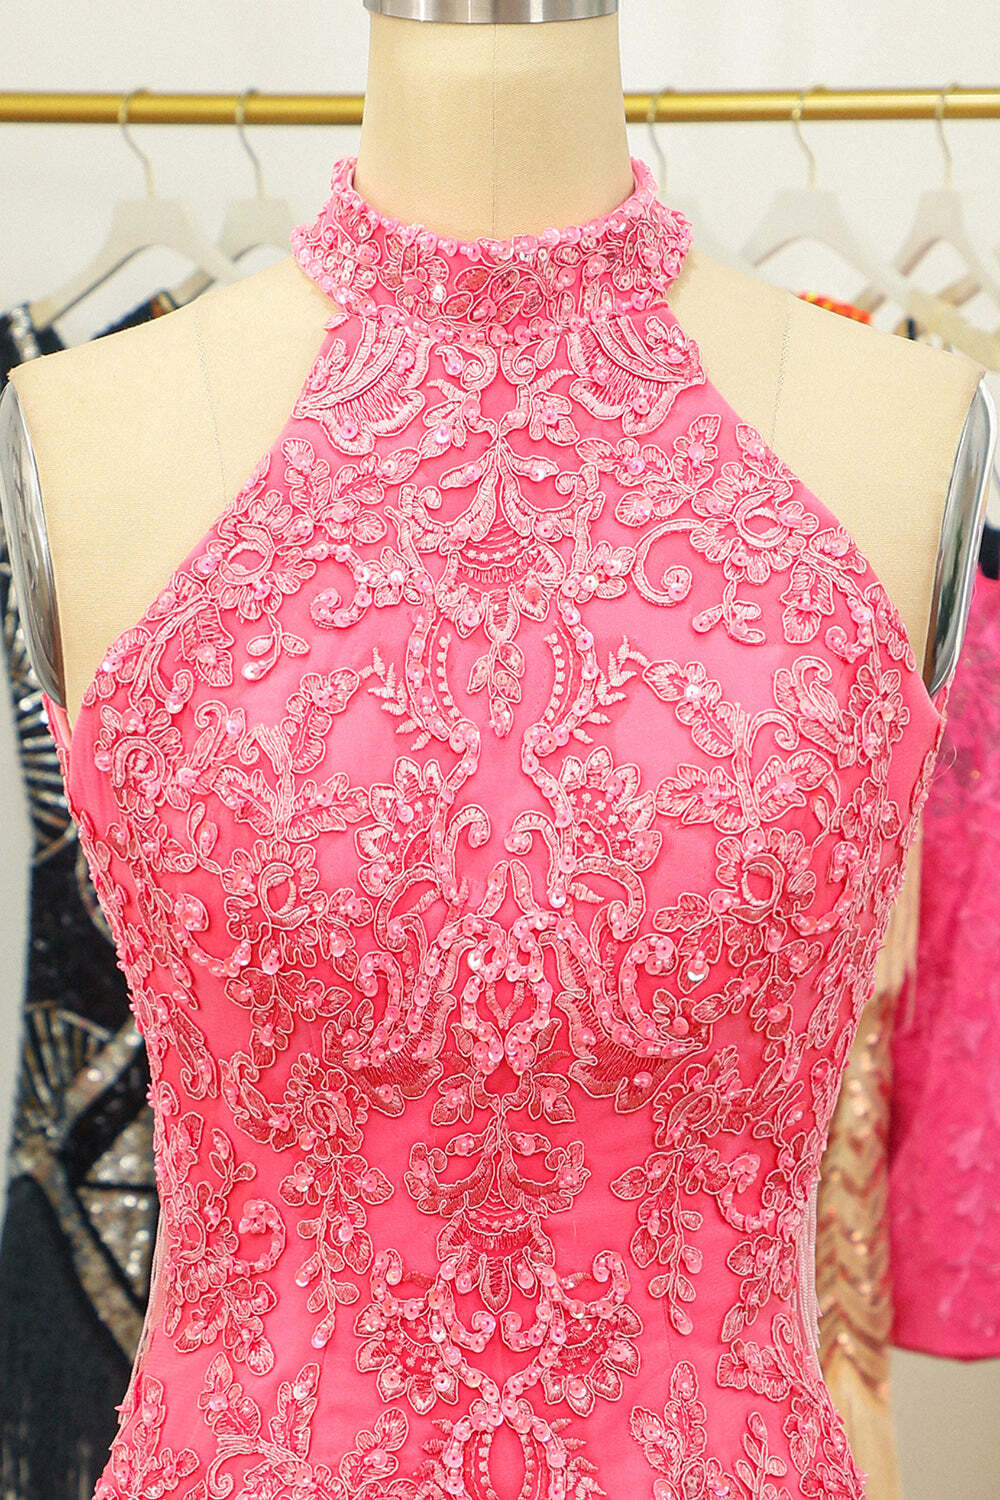 High Neck Hot Pink Lace Appliques Bodycon Mini Party Dress